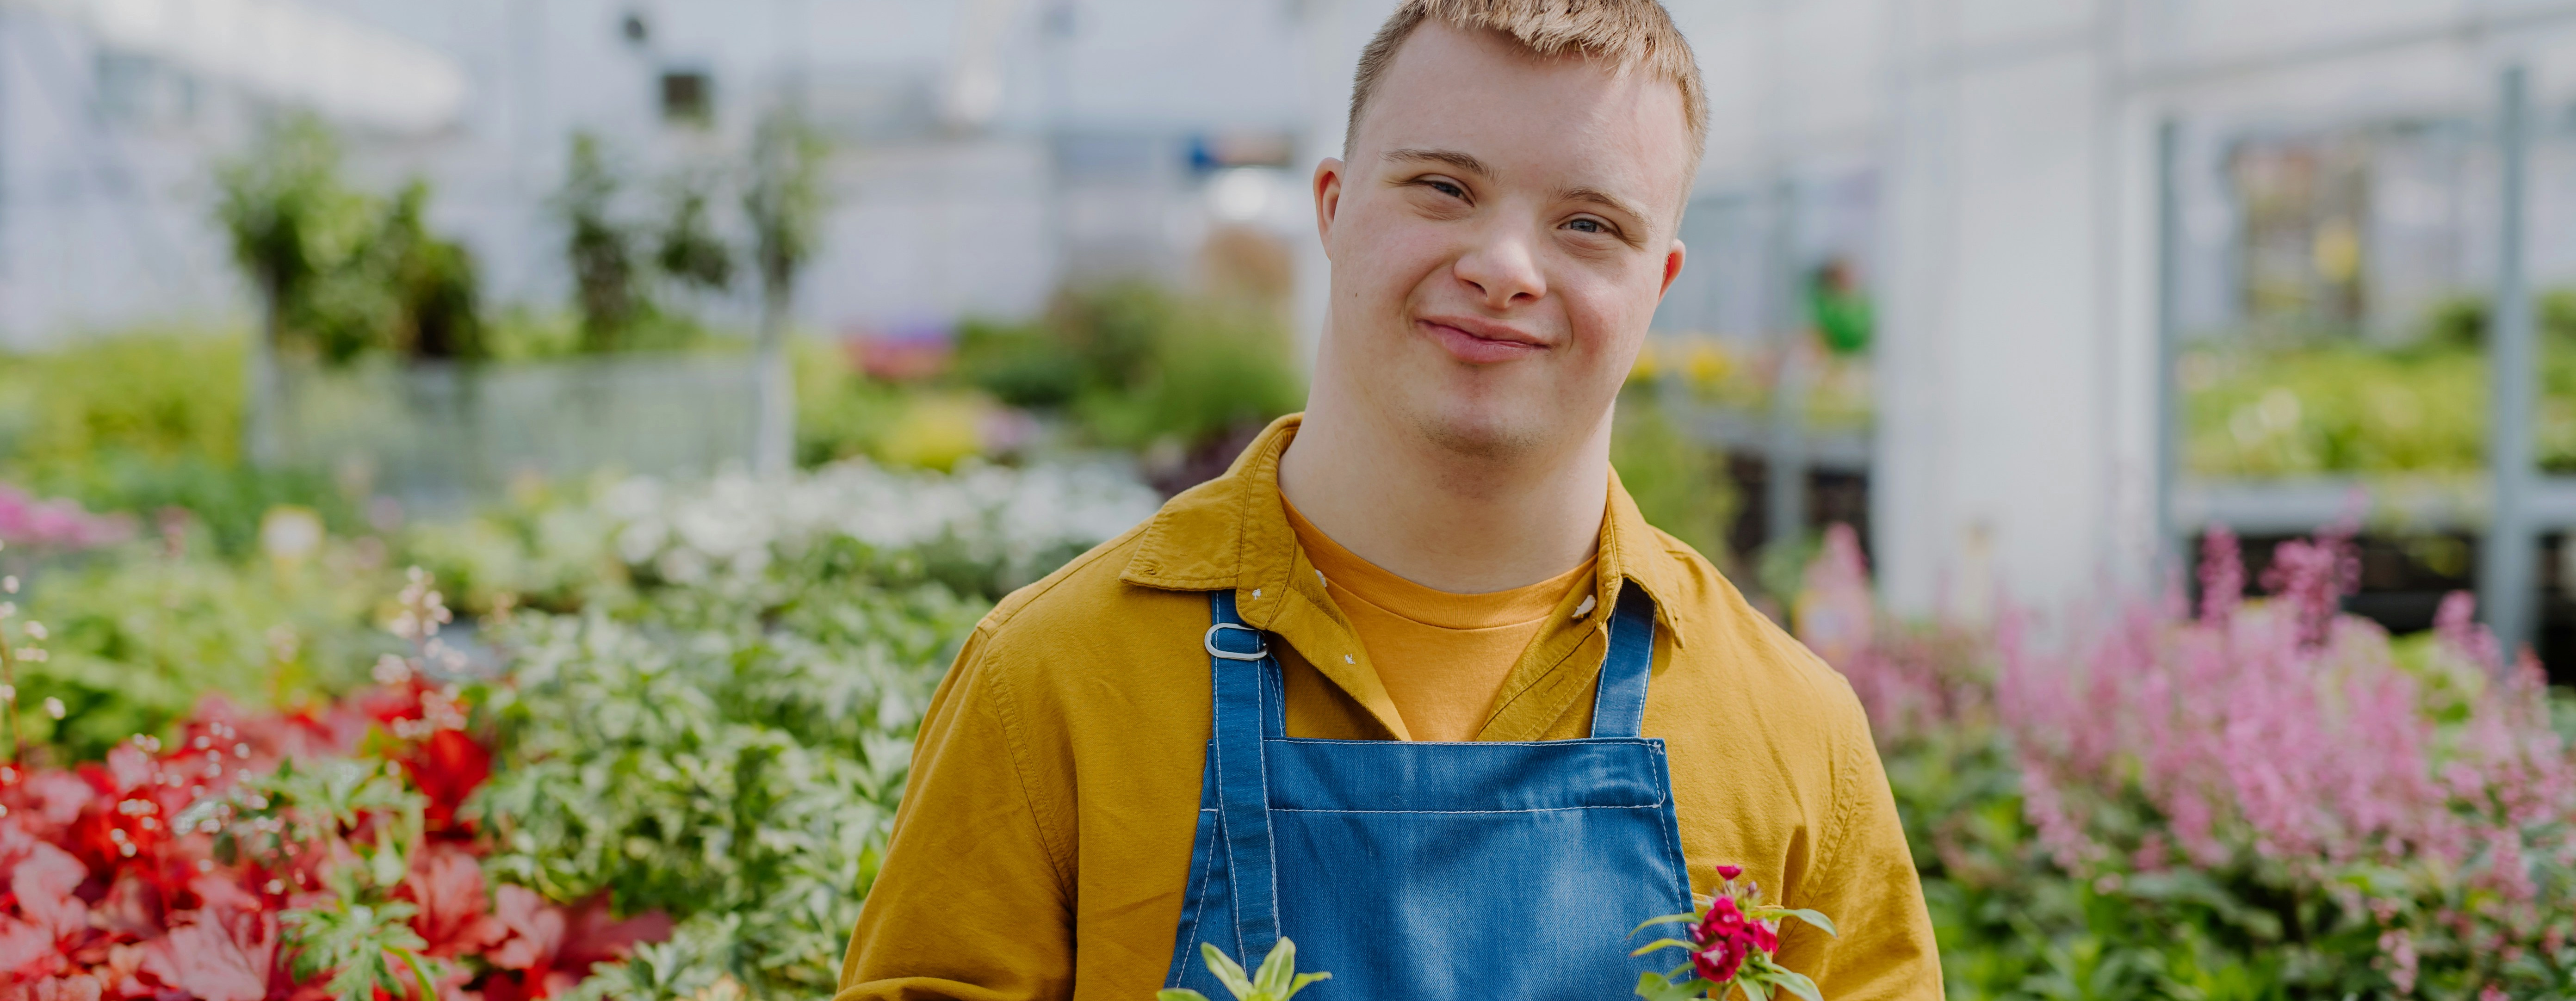 Photo of a young white man with Down syndrome, gently smiling and standing in a glass greenhouse, holding two potted plants.